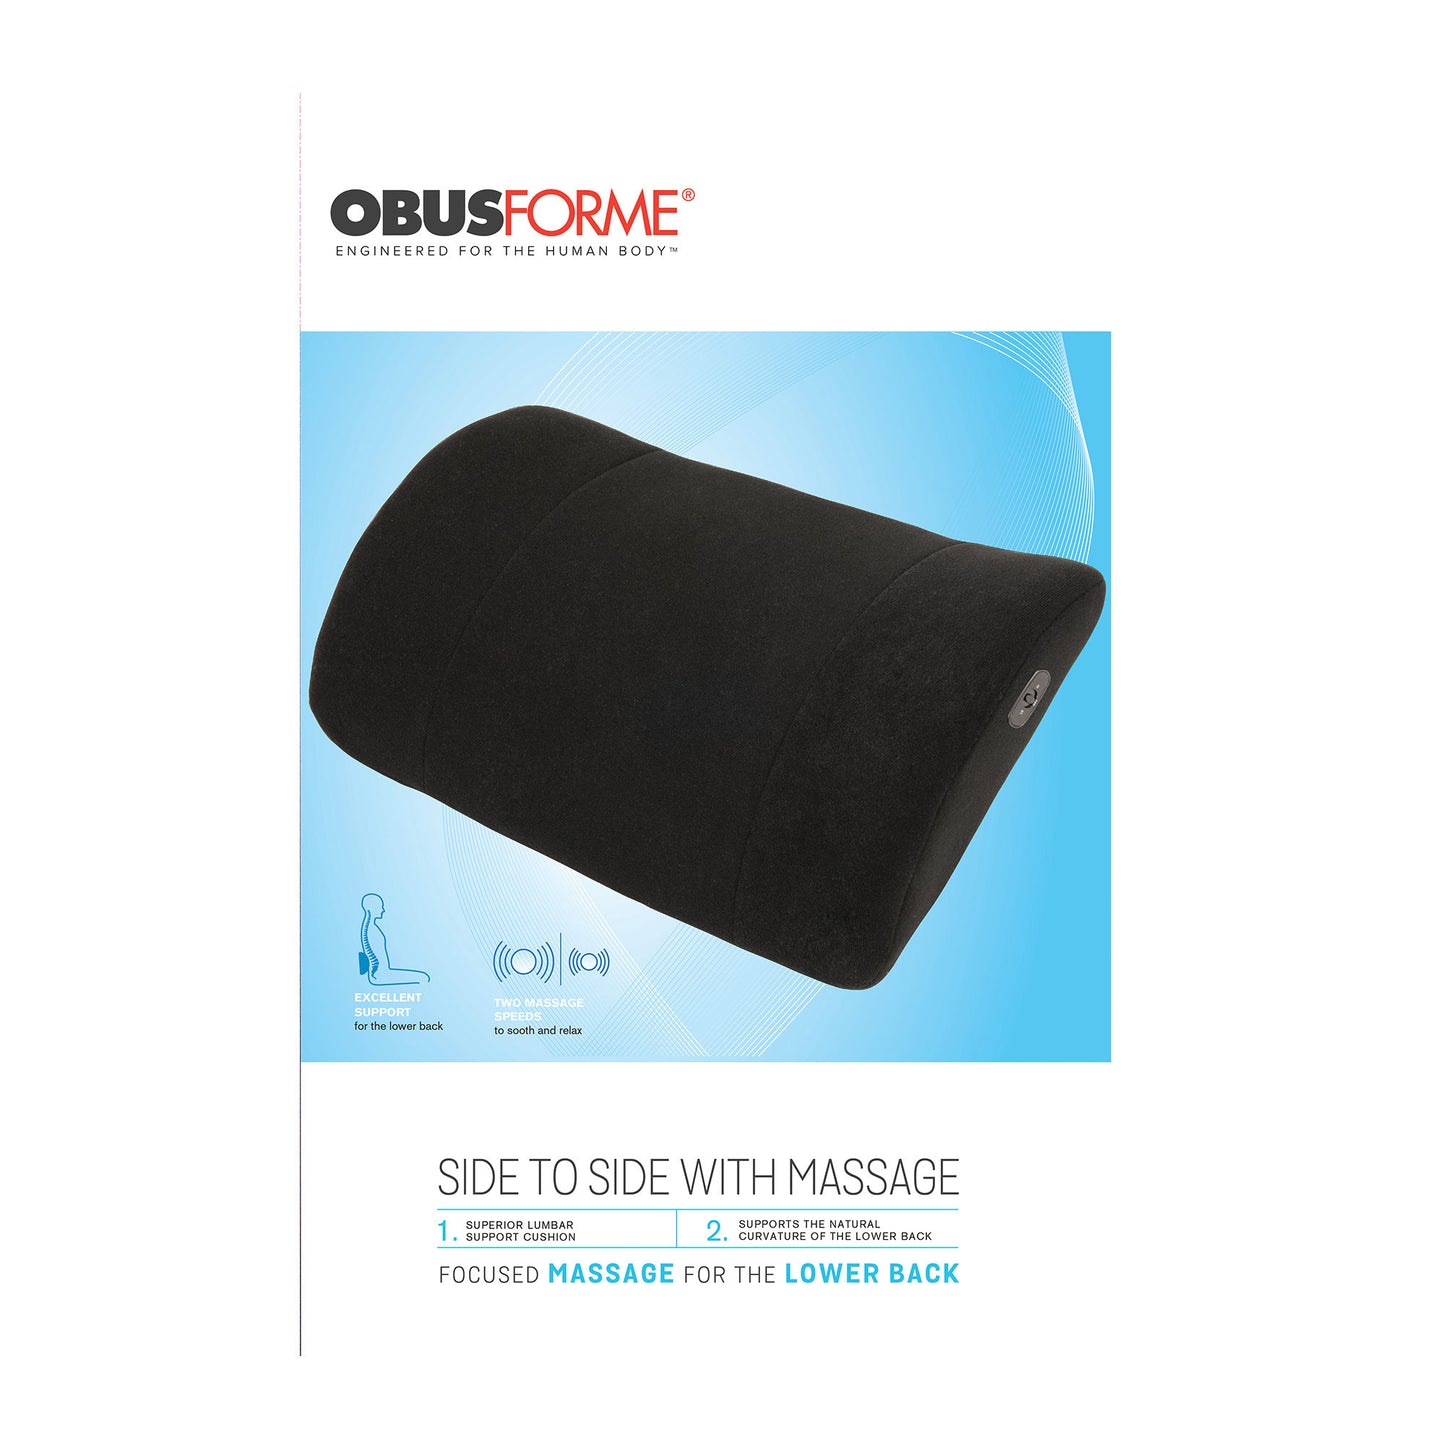 ObusForme Battery Operated Vibration Massage Lumbar Support - 15-07375